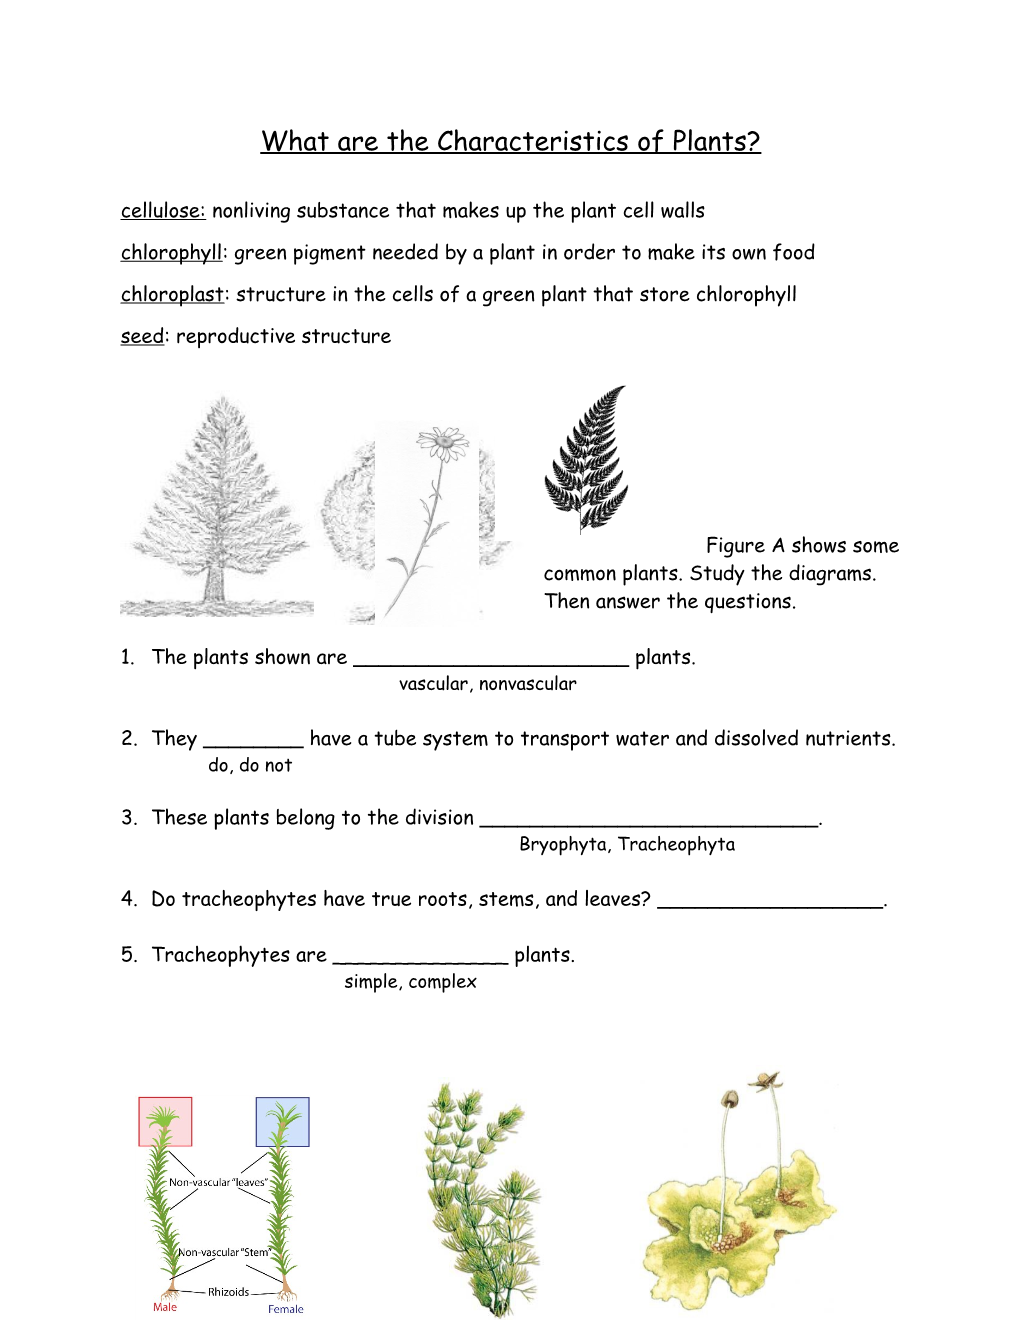 What Are the Characteristics of Plants